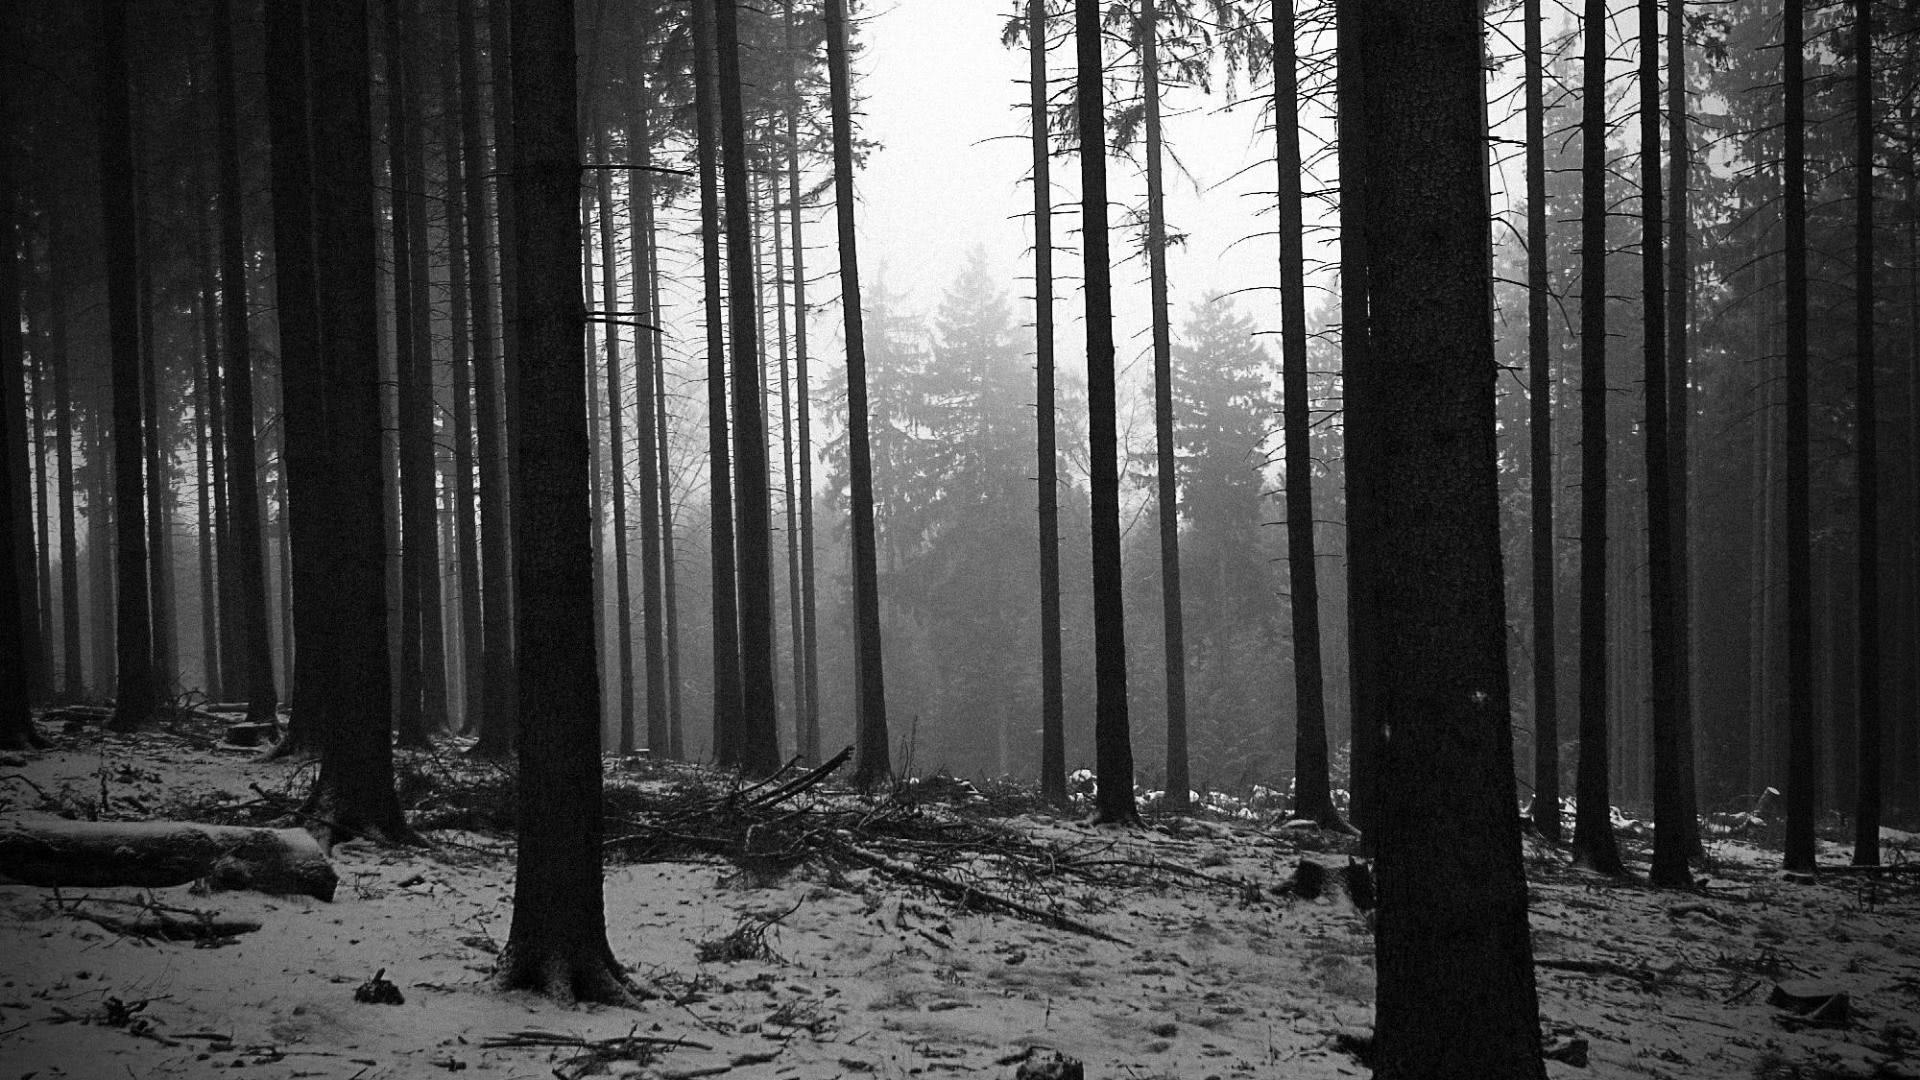 General 1920x1080 forest monochrome trees snow mist nature